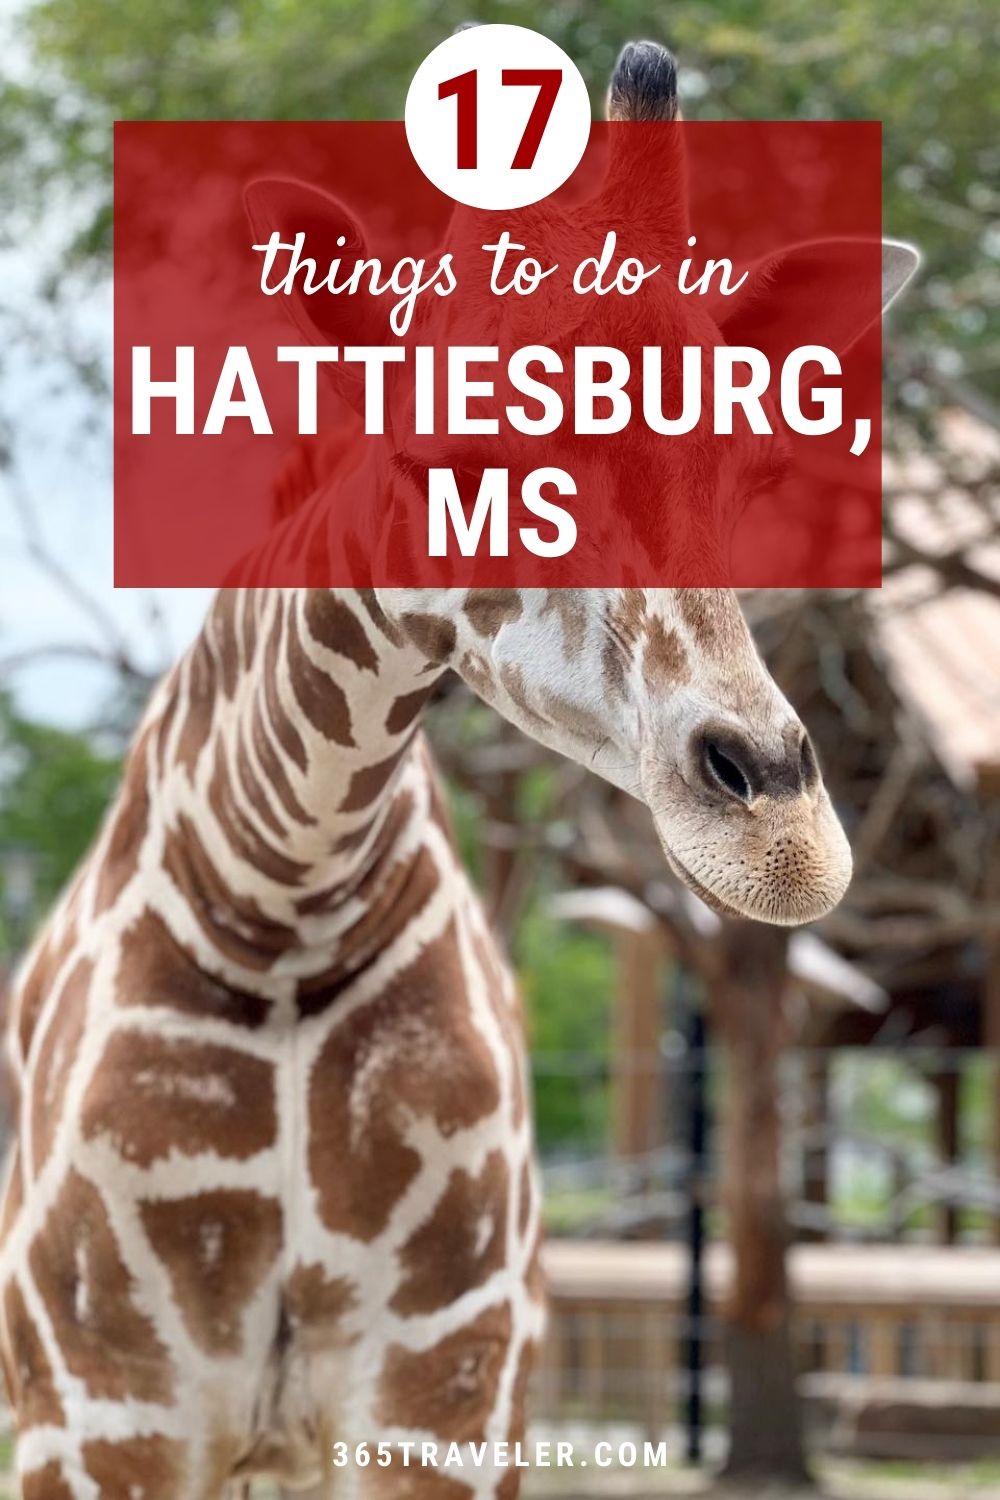 17 Things To Do in Hattiesburg Ms You’ll Love